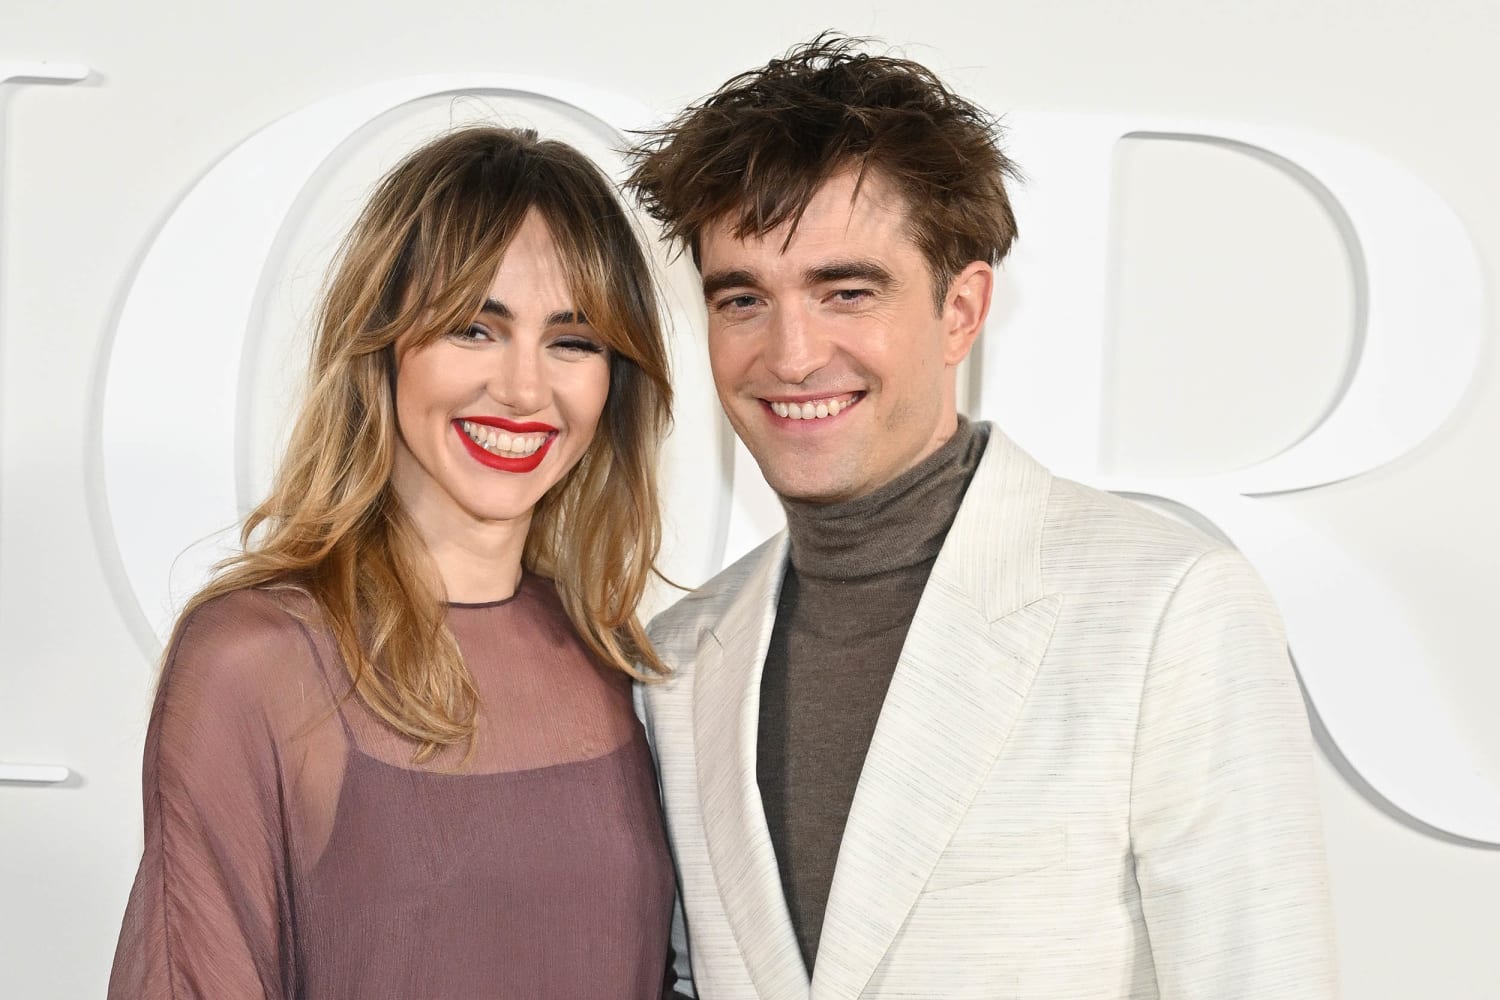 Suki Waterhouse shares honest message about postpartum period after welcoming 1st child